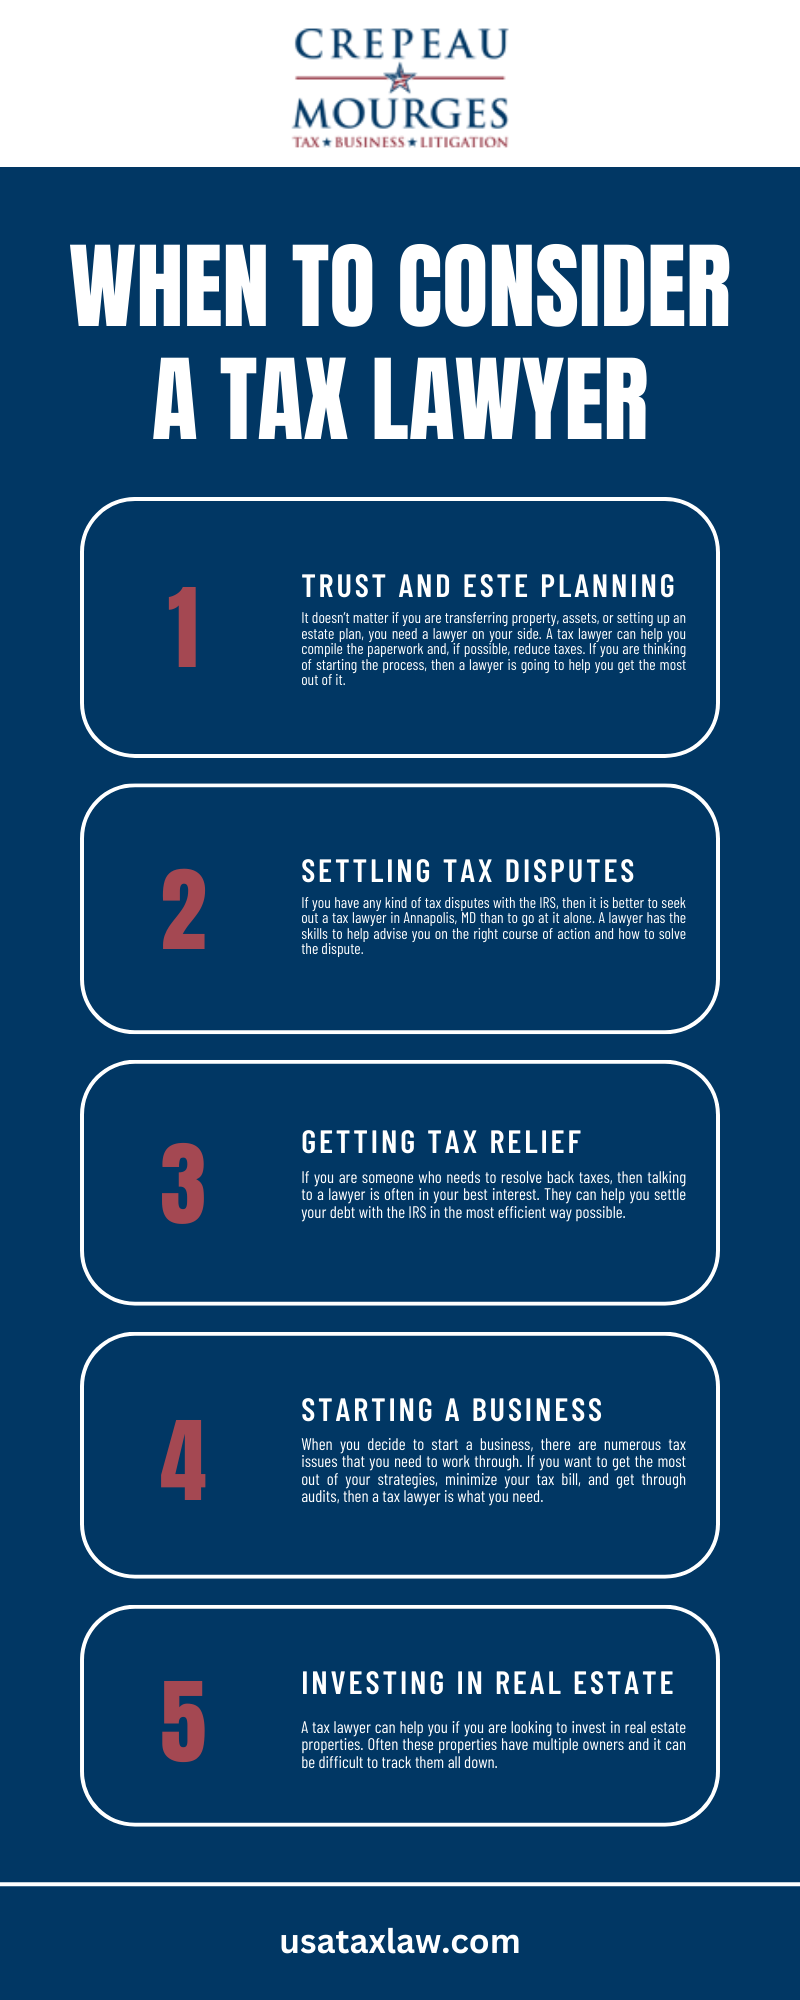 WHEN TO CONSIDER A TAX LAWYER INFOGRAPHIC